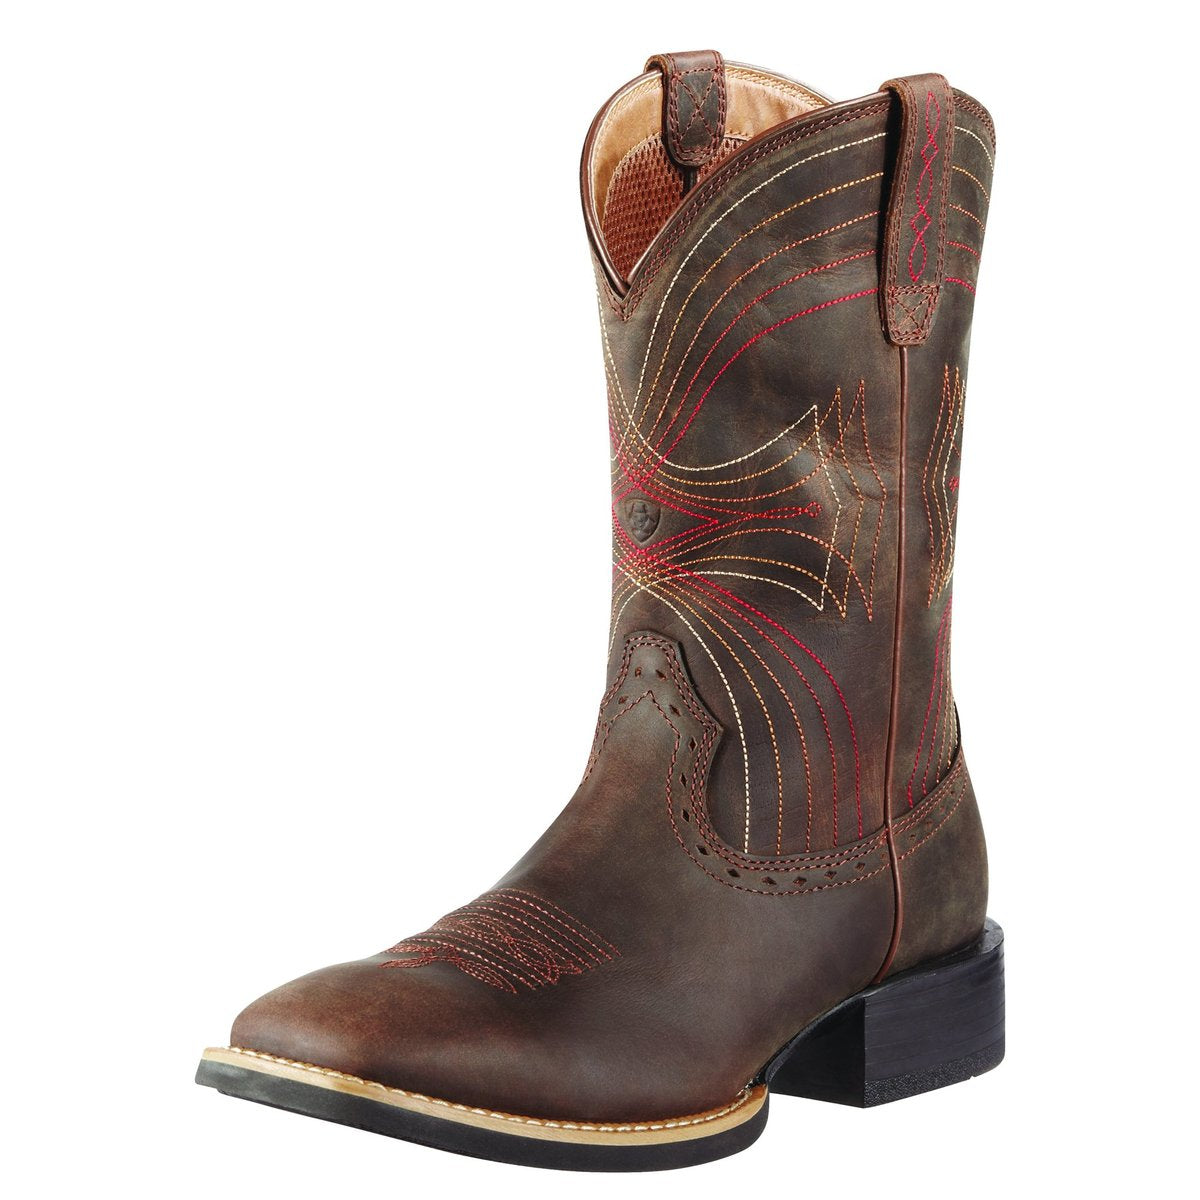 Ariat Mns Sport Wide Sq Toe Distressed Brown - CLEARANCE